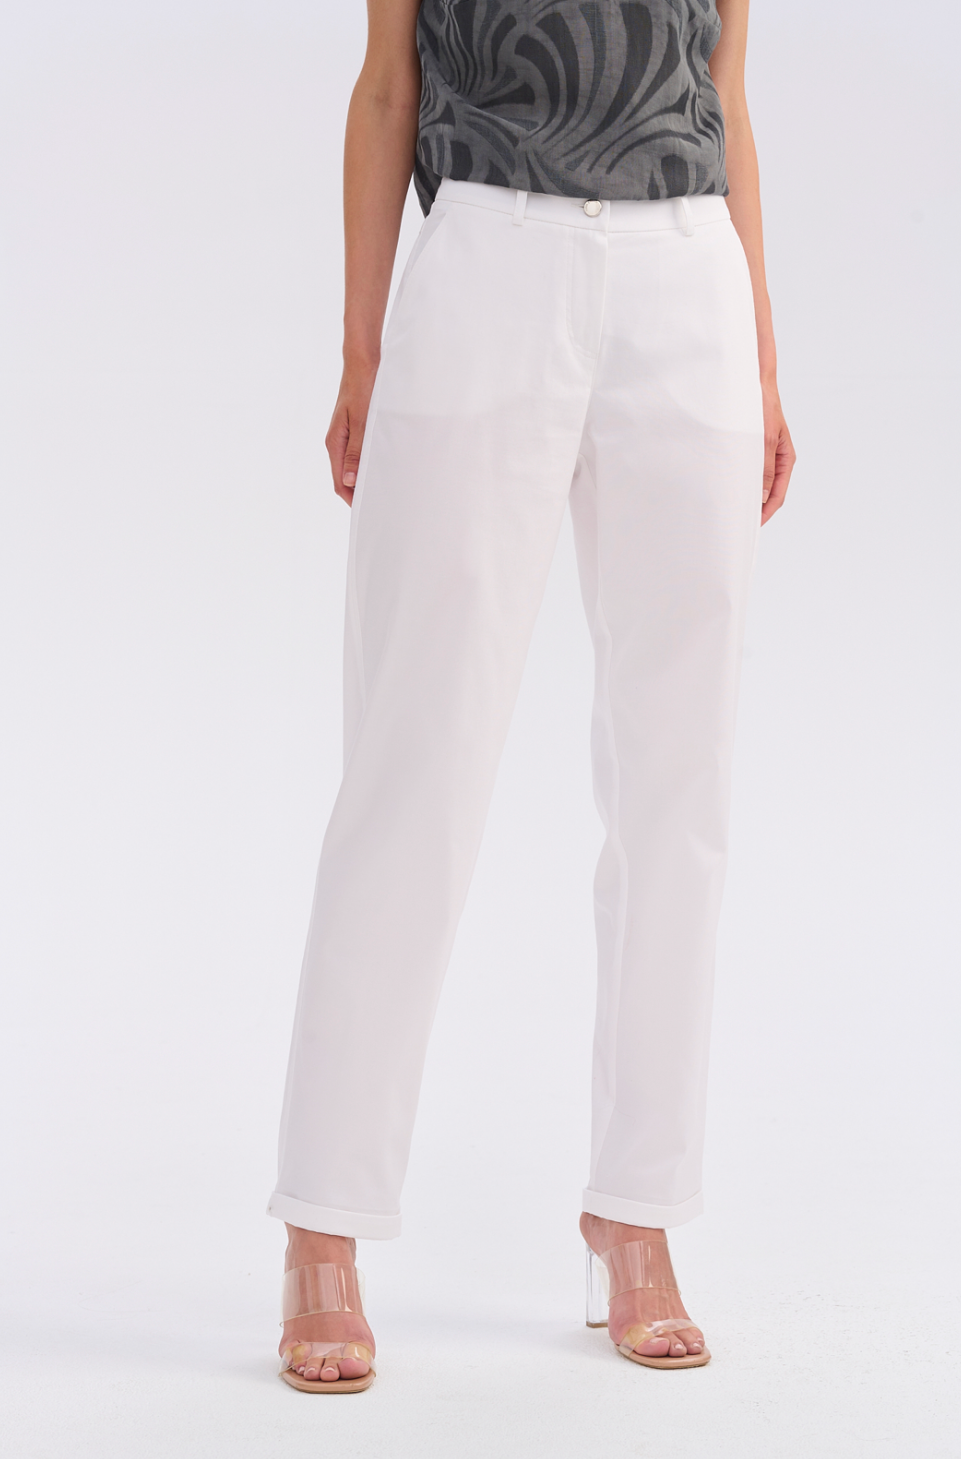 Casual FERIA pants in white